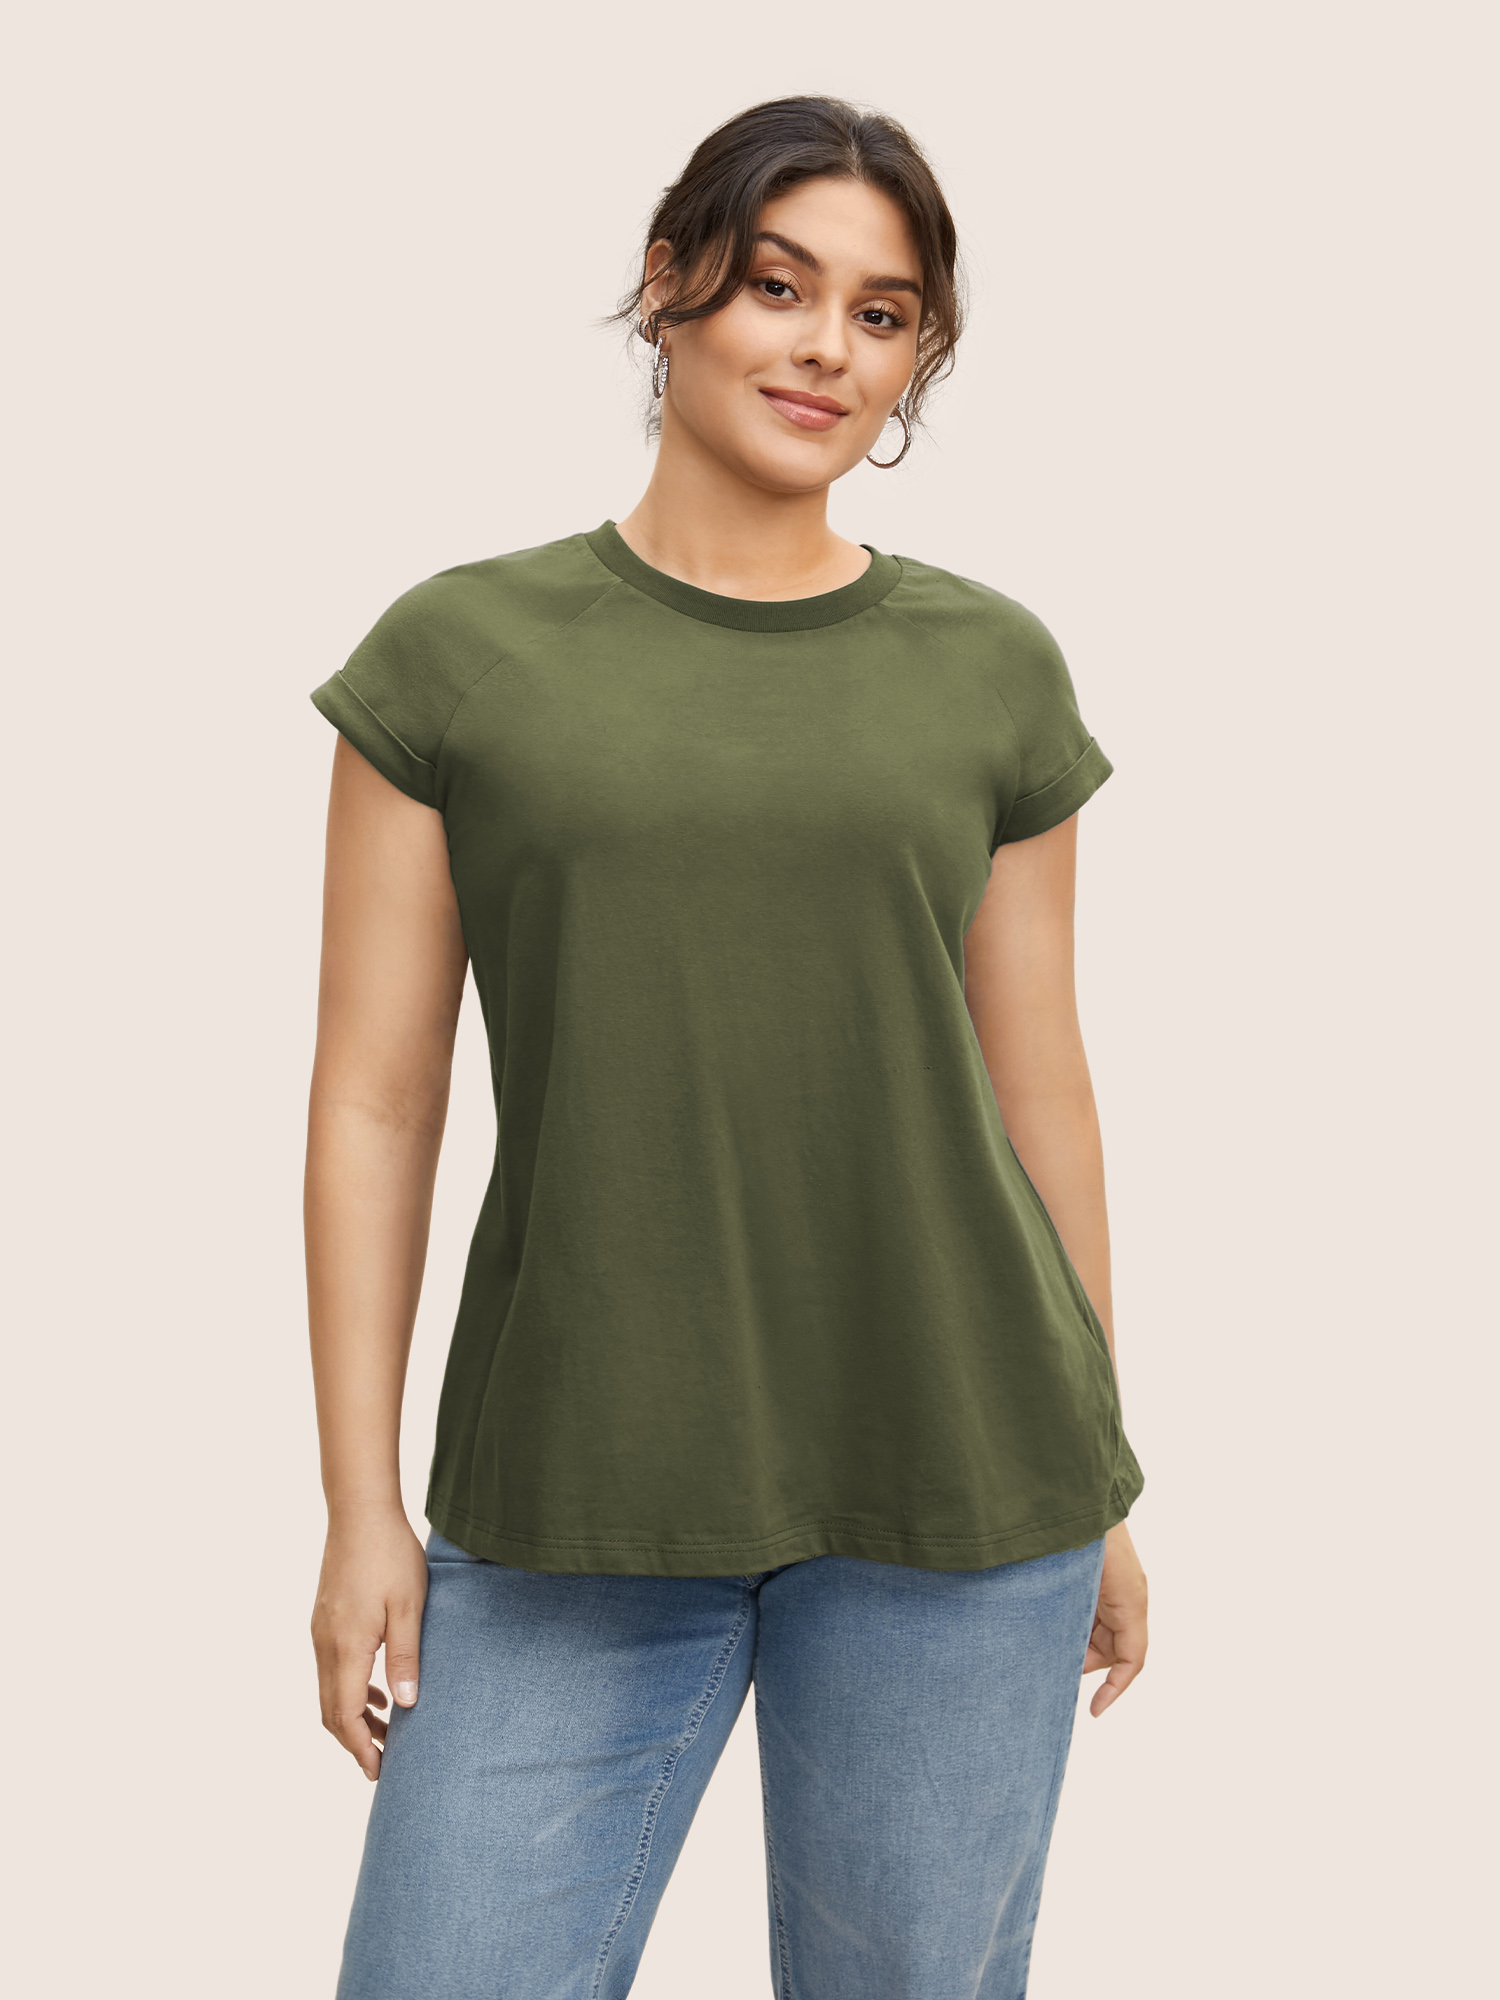 

Plus Size Cotton Solid Crew Neck Roll Sleeve T-shirt ArmyGreen Women Casual Roll Hem Round Neck Everyday T-shirts BloomChic